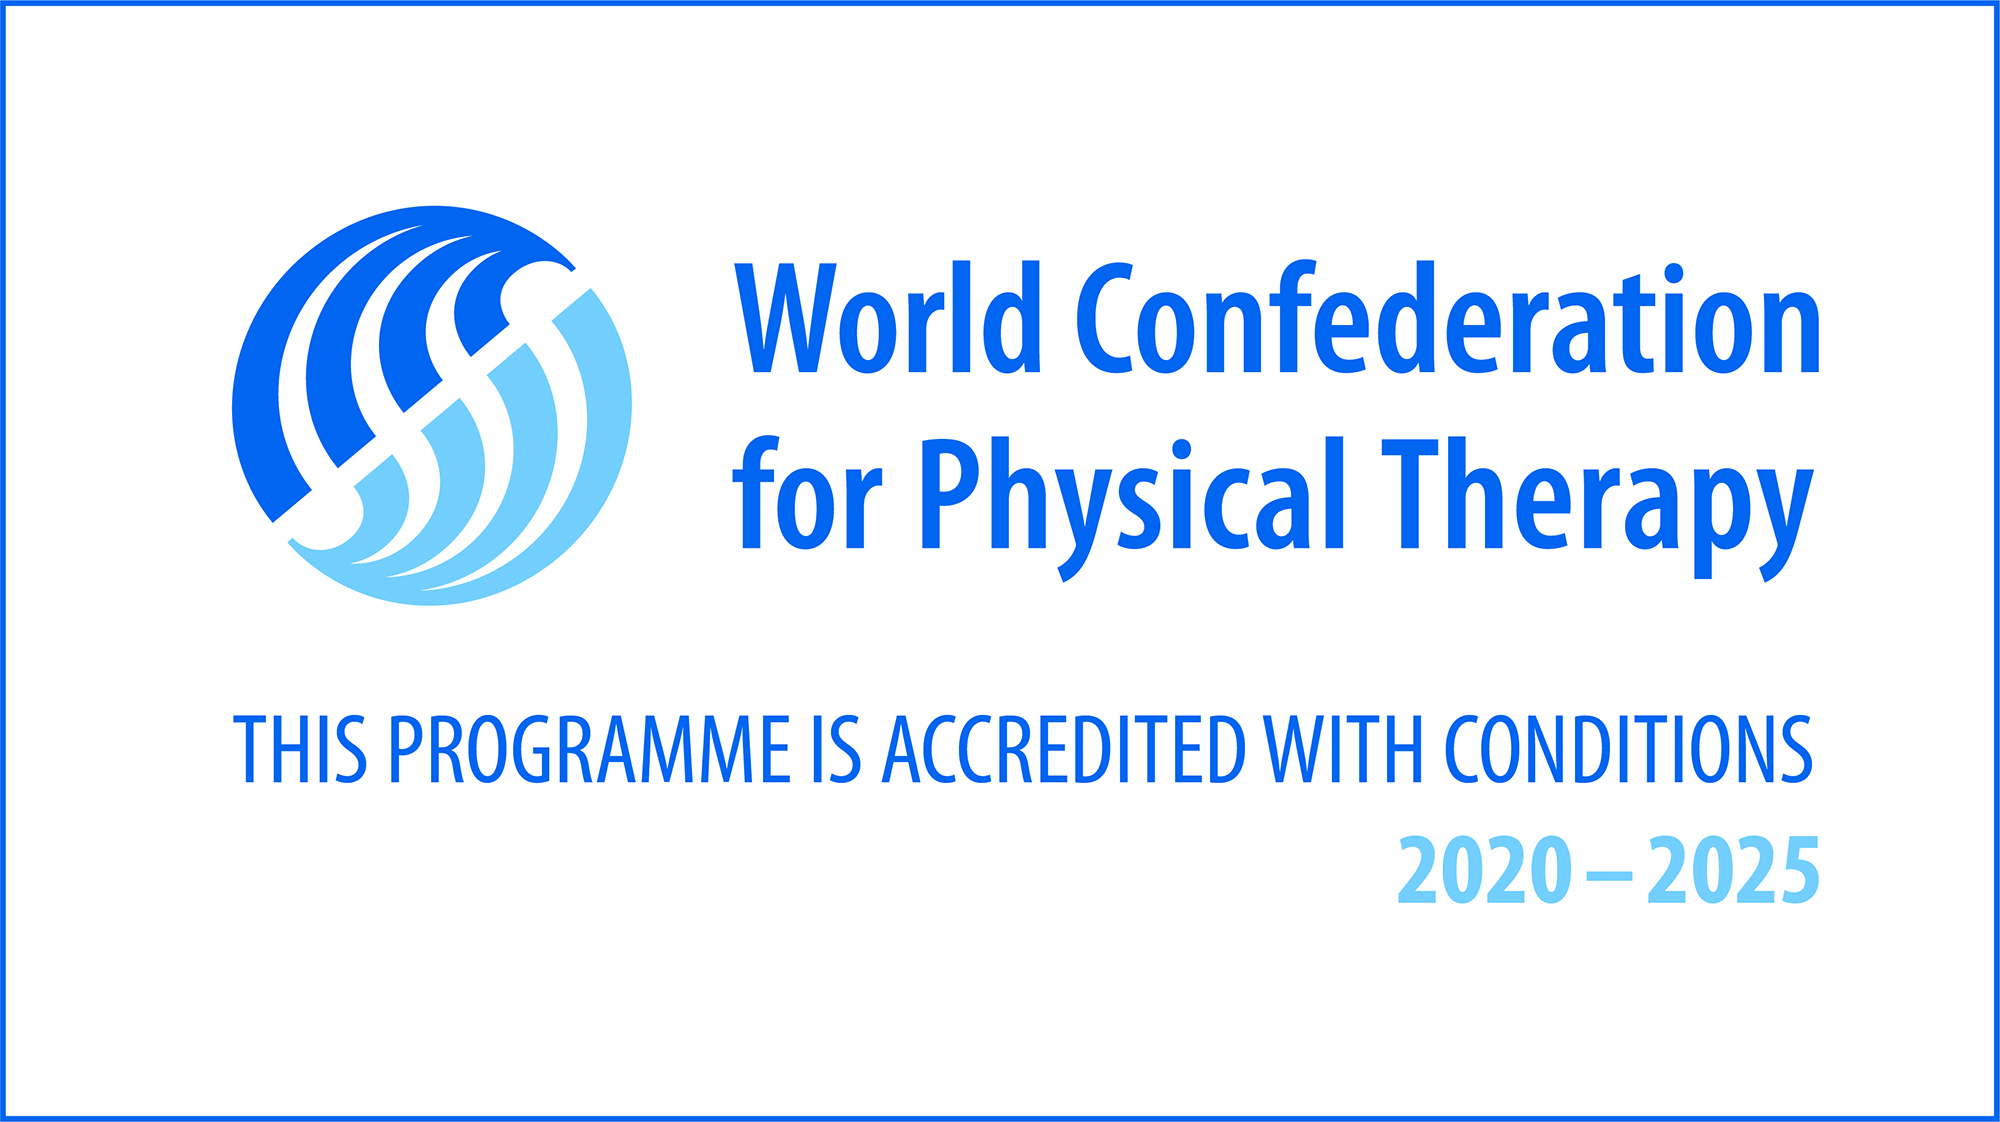 World Confederation for Physical Therapy -akkreditointi.